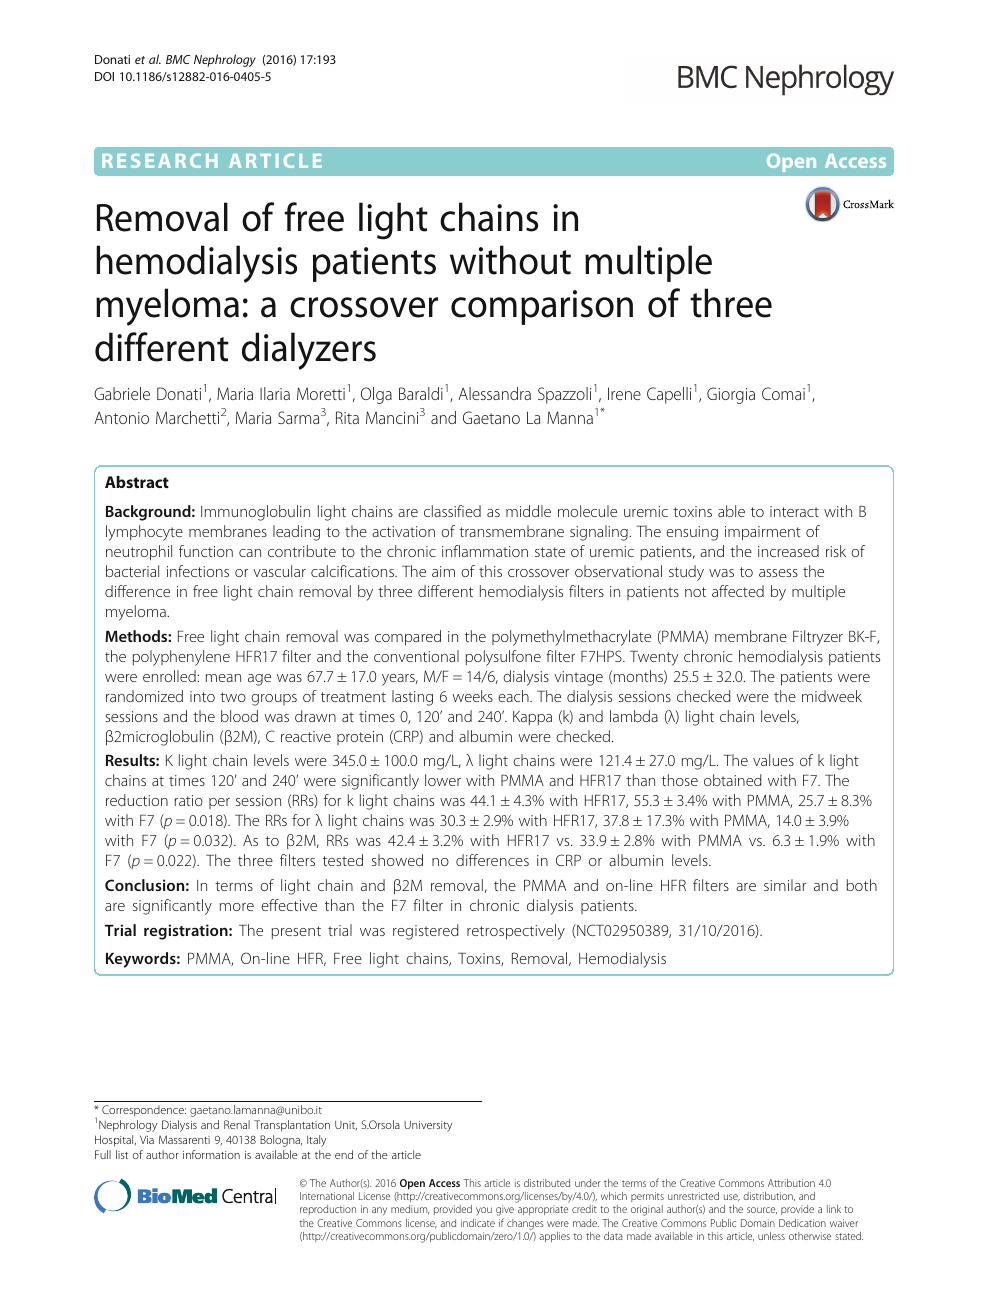 Removal of free light chains in hemodialysis without multiple myeloma: a crossover comparison of three different dialyzers – topic of research paper in Biological sciences. Download scholarly article PDF and read